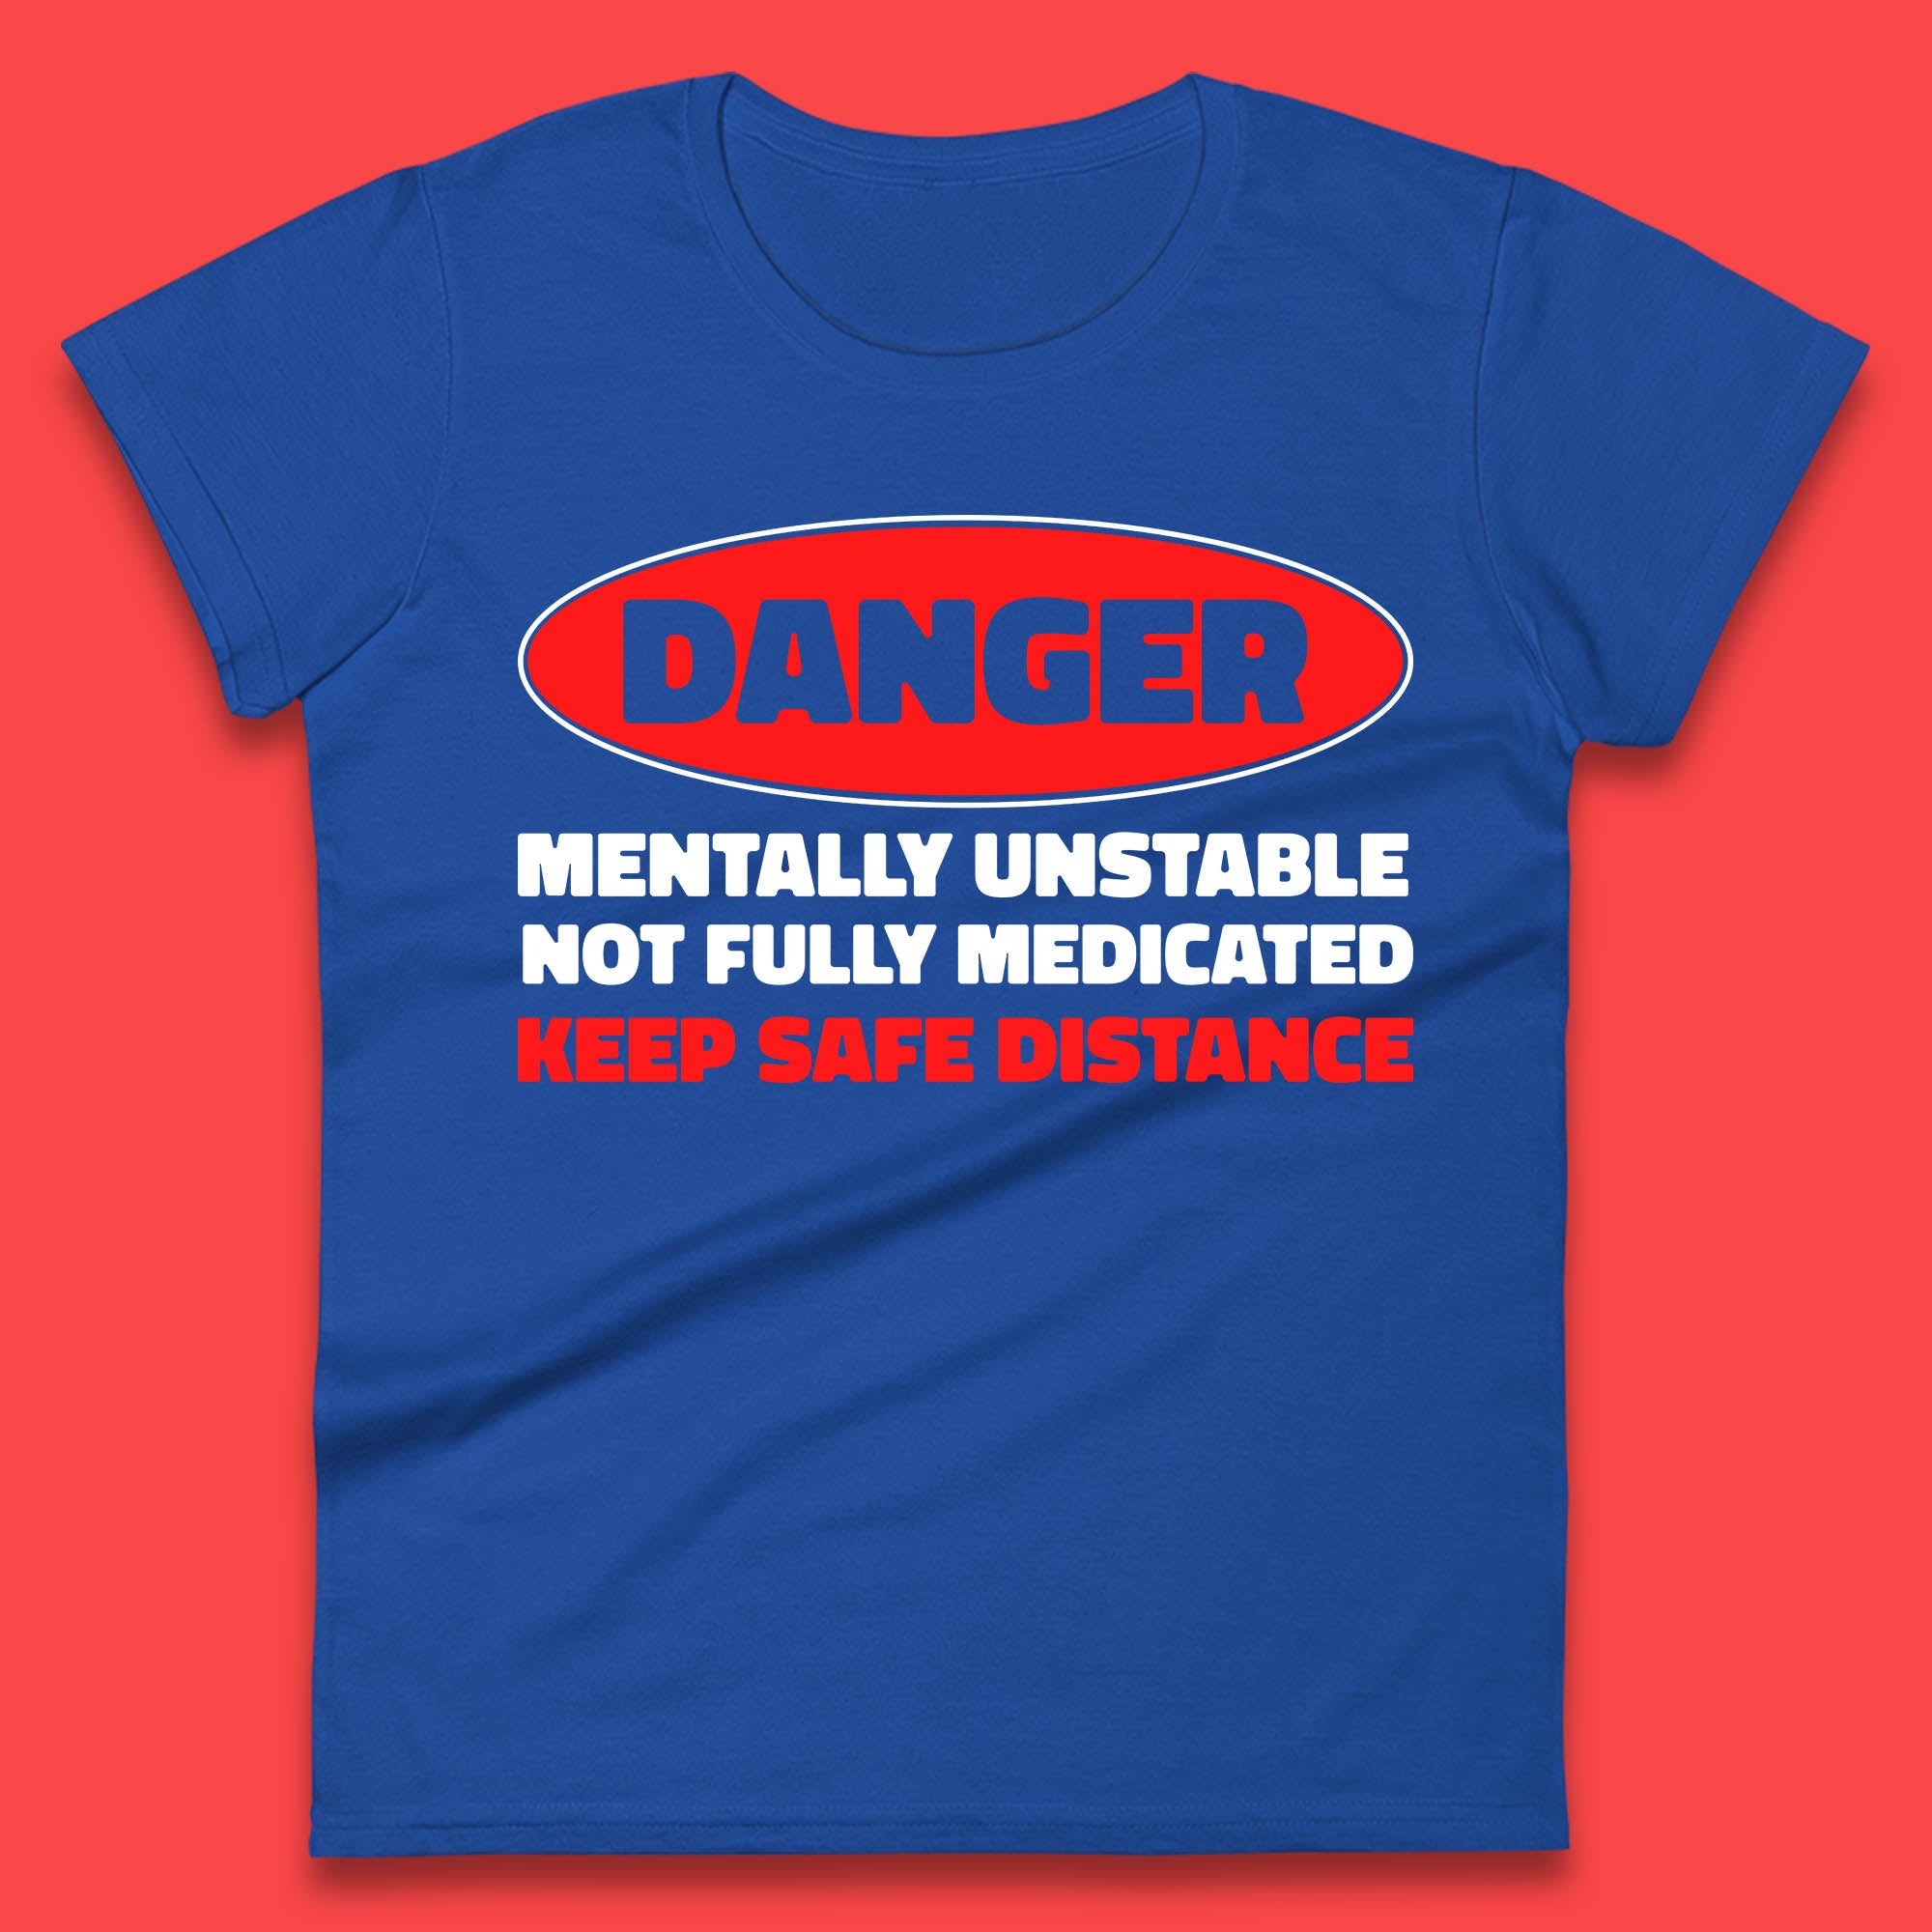 Danger Mentally Unstable Not Fully Medicated Keep Safe Distance Funny Saying Quote Womens Tee Top